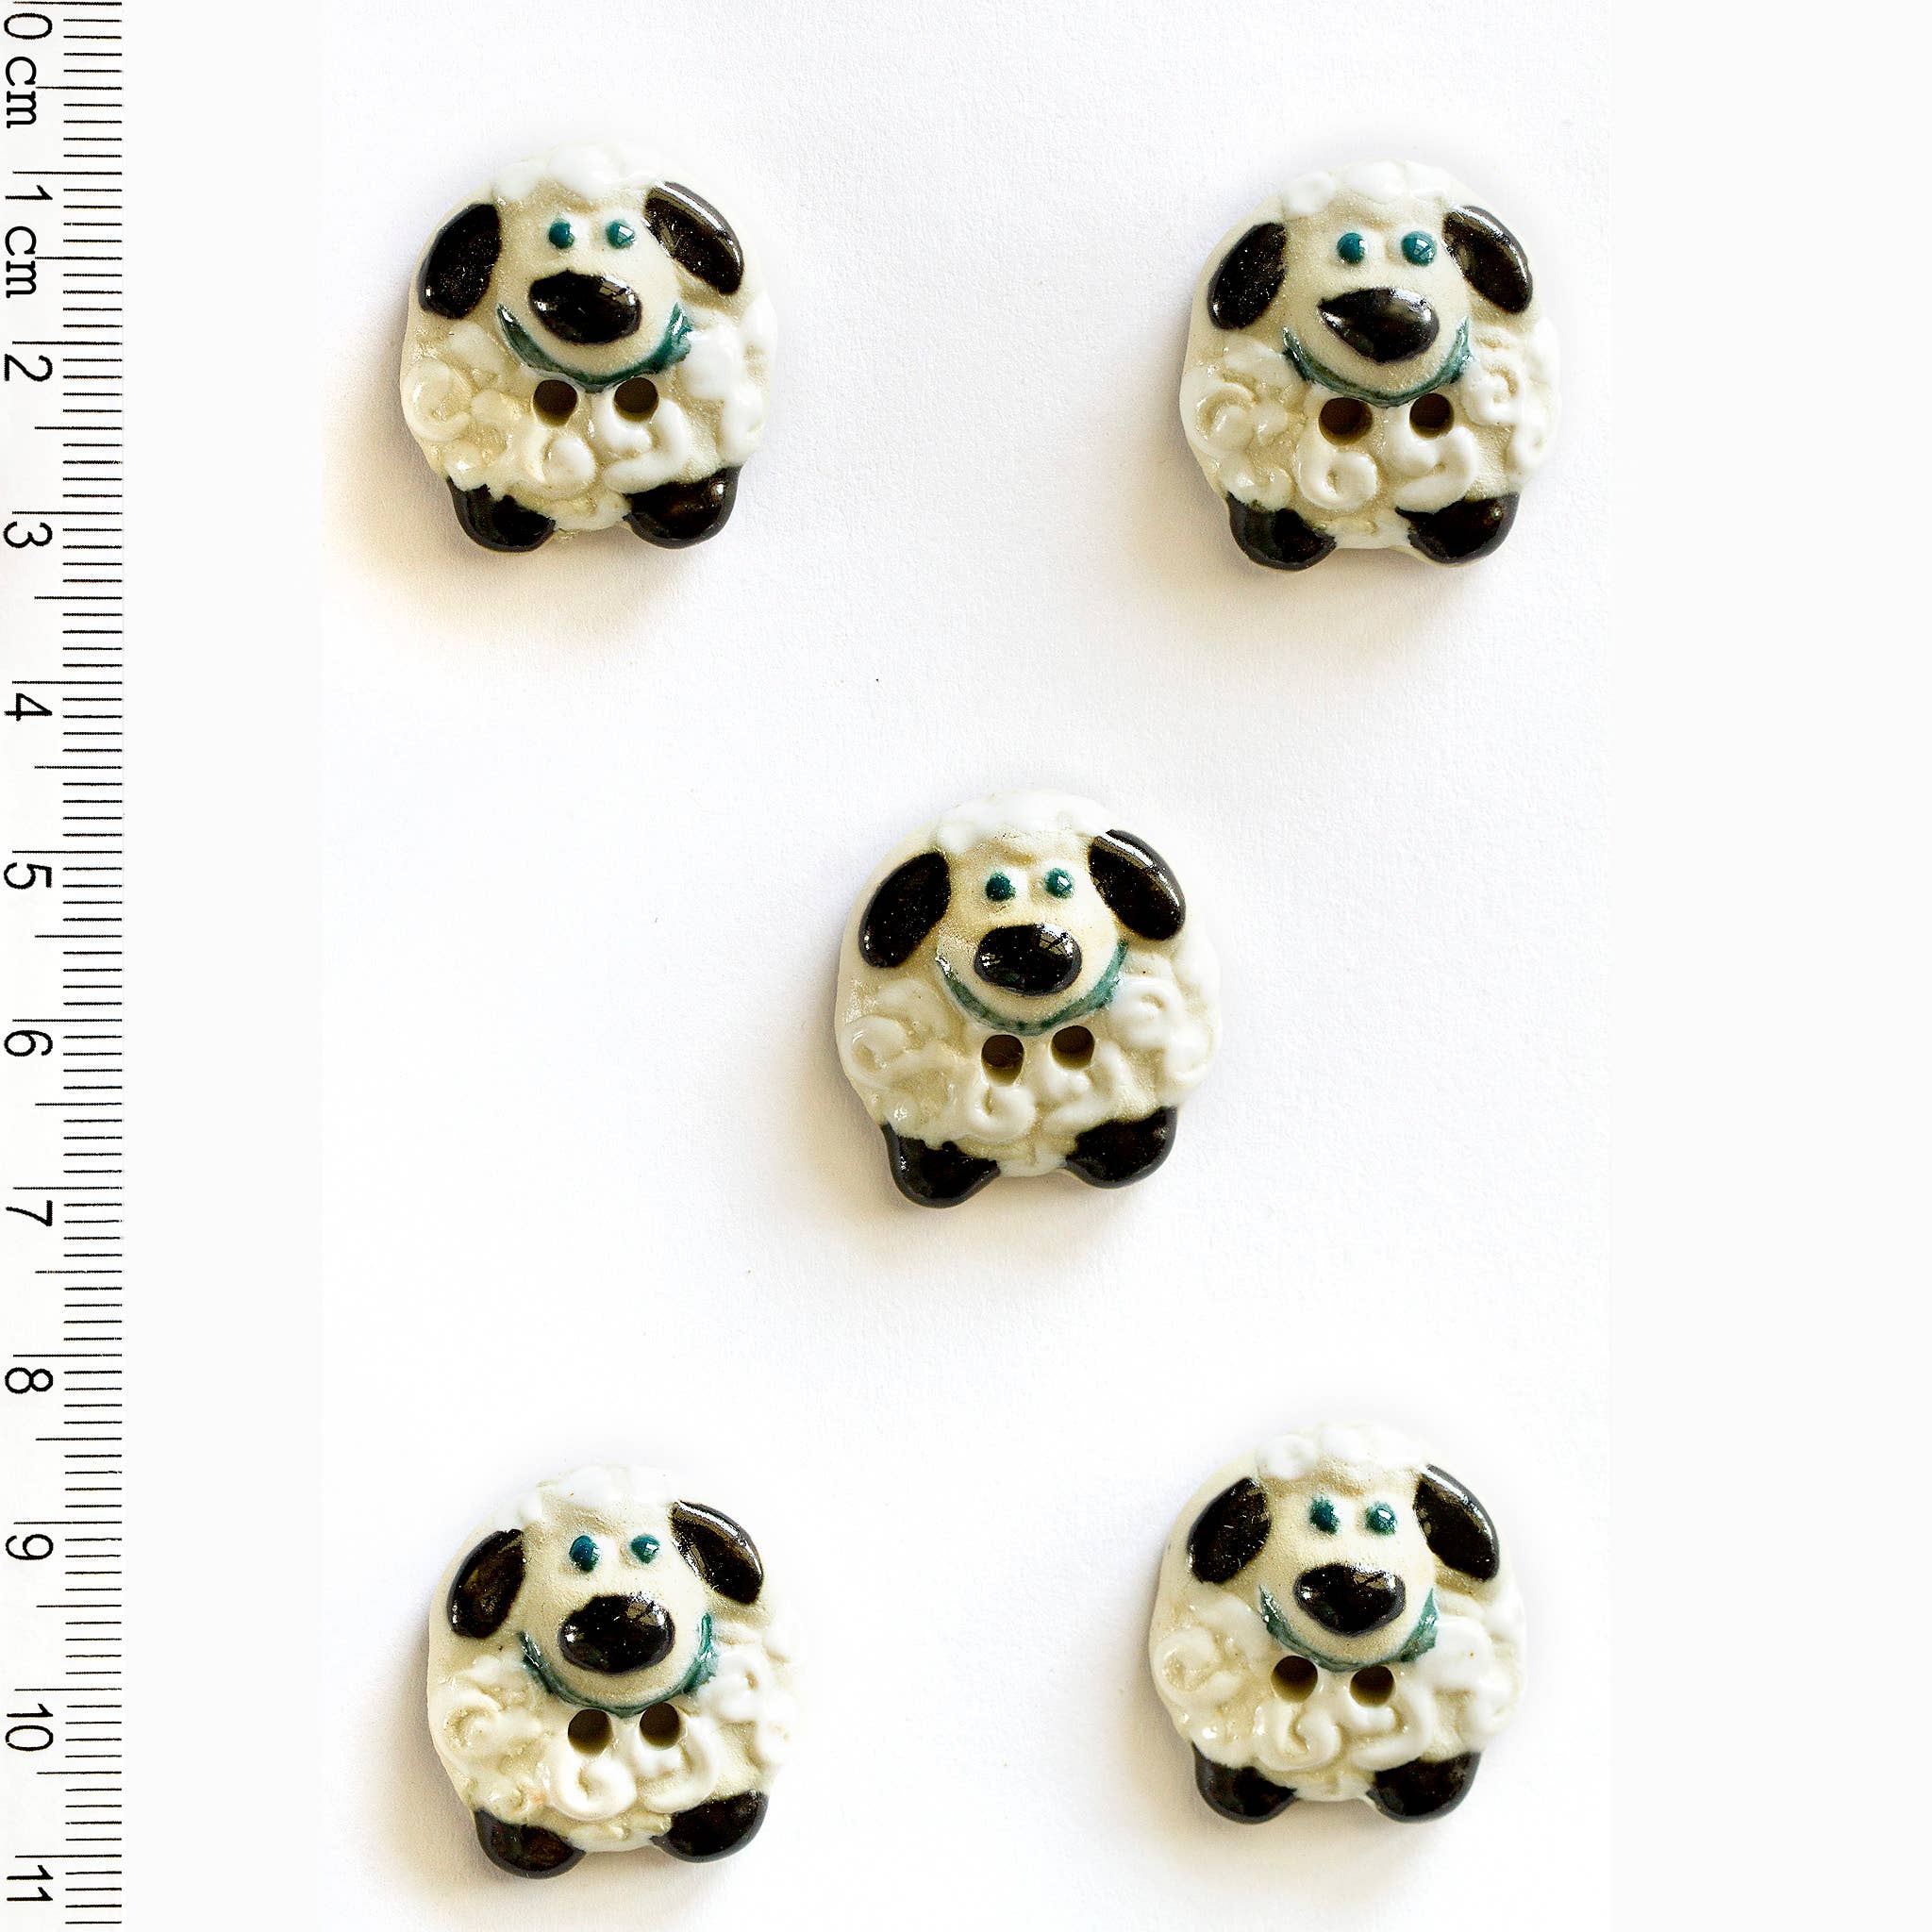 Incomparable Buttons - 5 Sheep Buttons